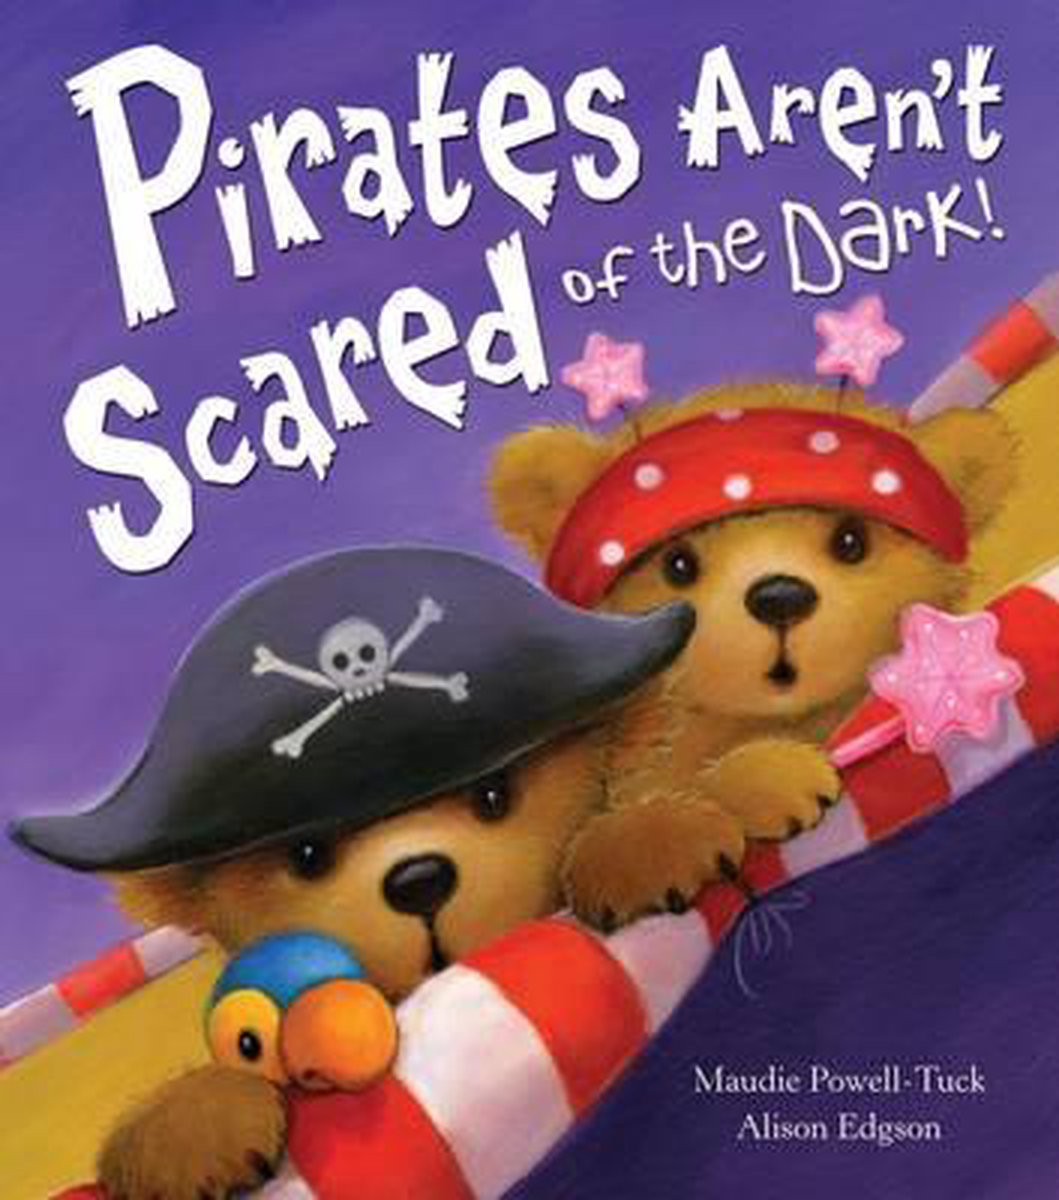 Pirates Aren'T Scared Of The Dark! - Maudie Powell-Tuck